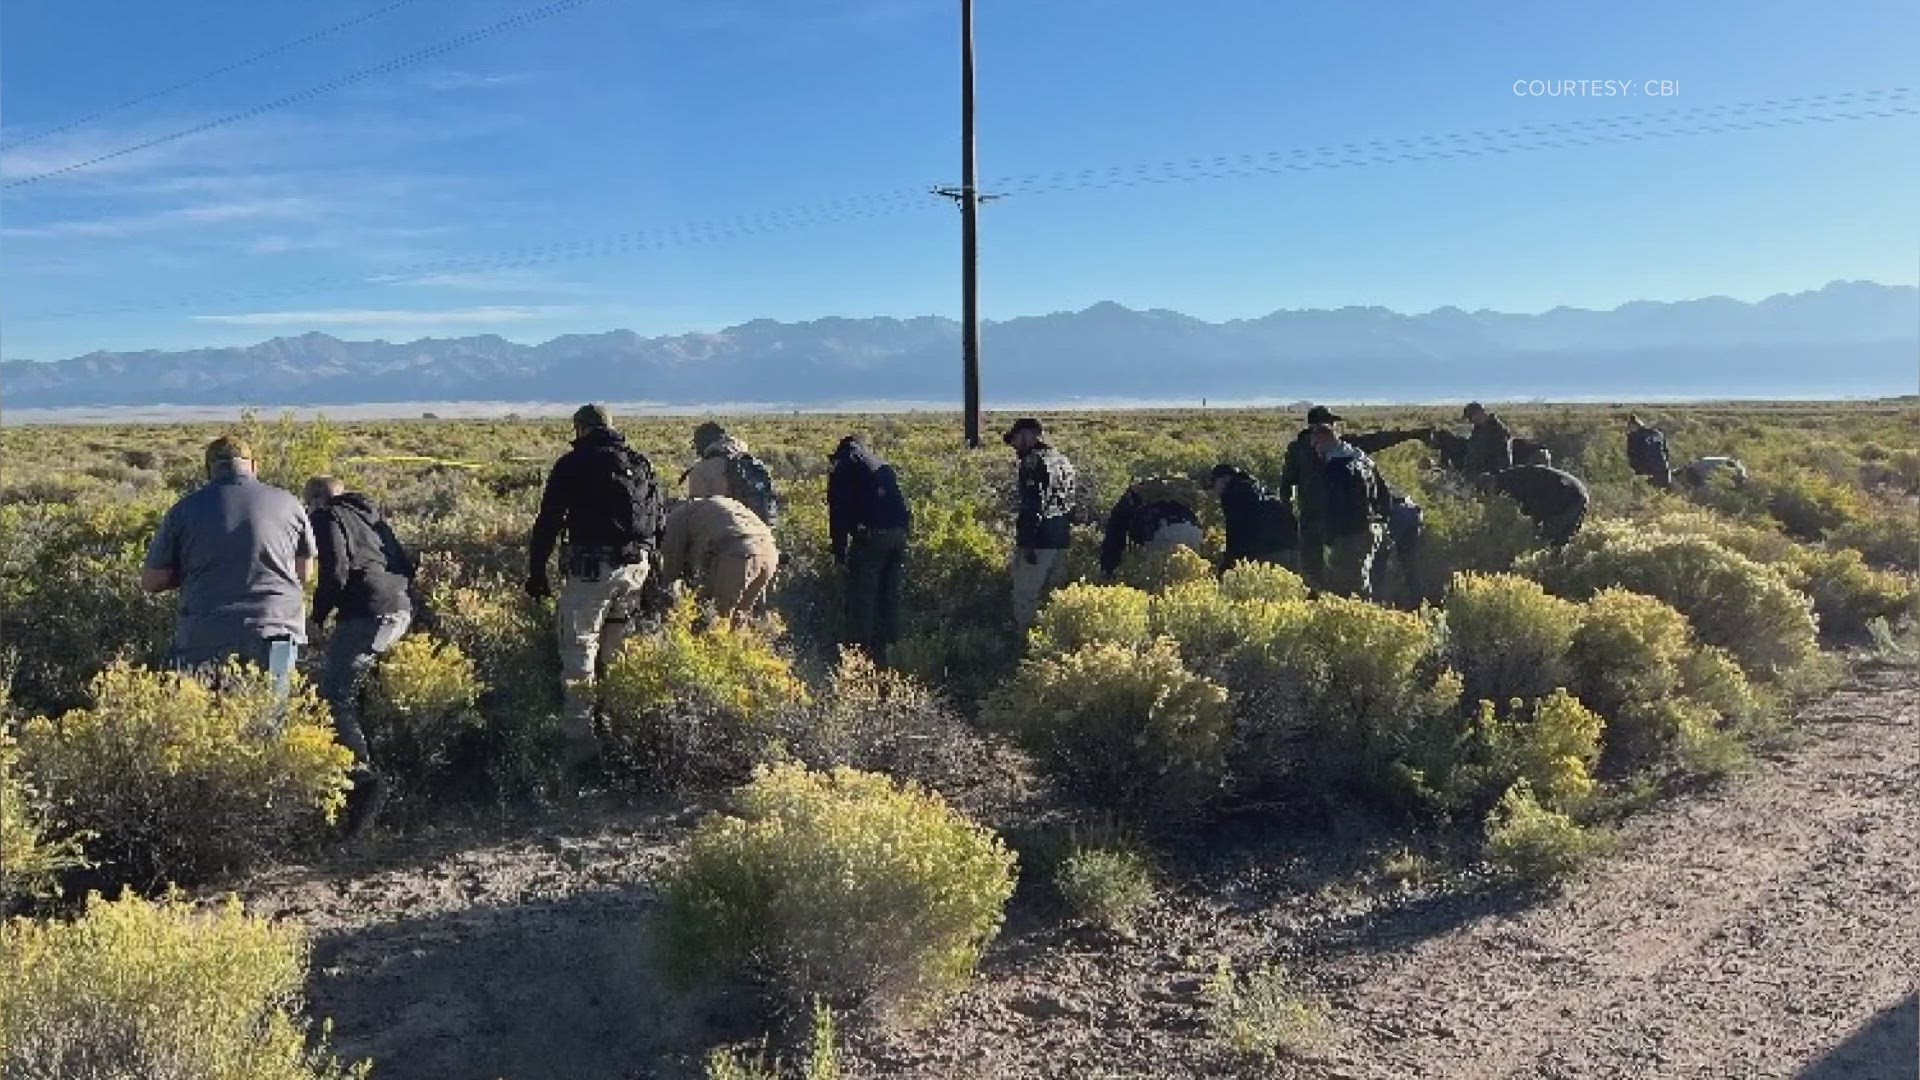 Colorado Bureau of Investigation says crews returned to Saguache County today to search the site where the remains of Suzanne Morphew were found.